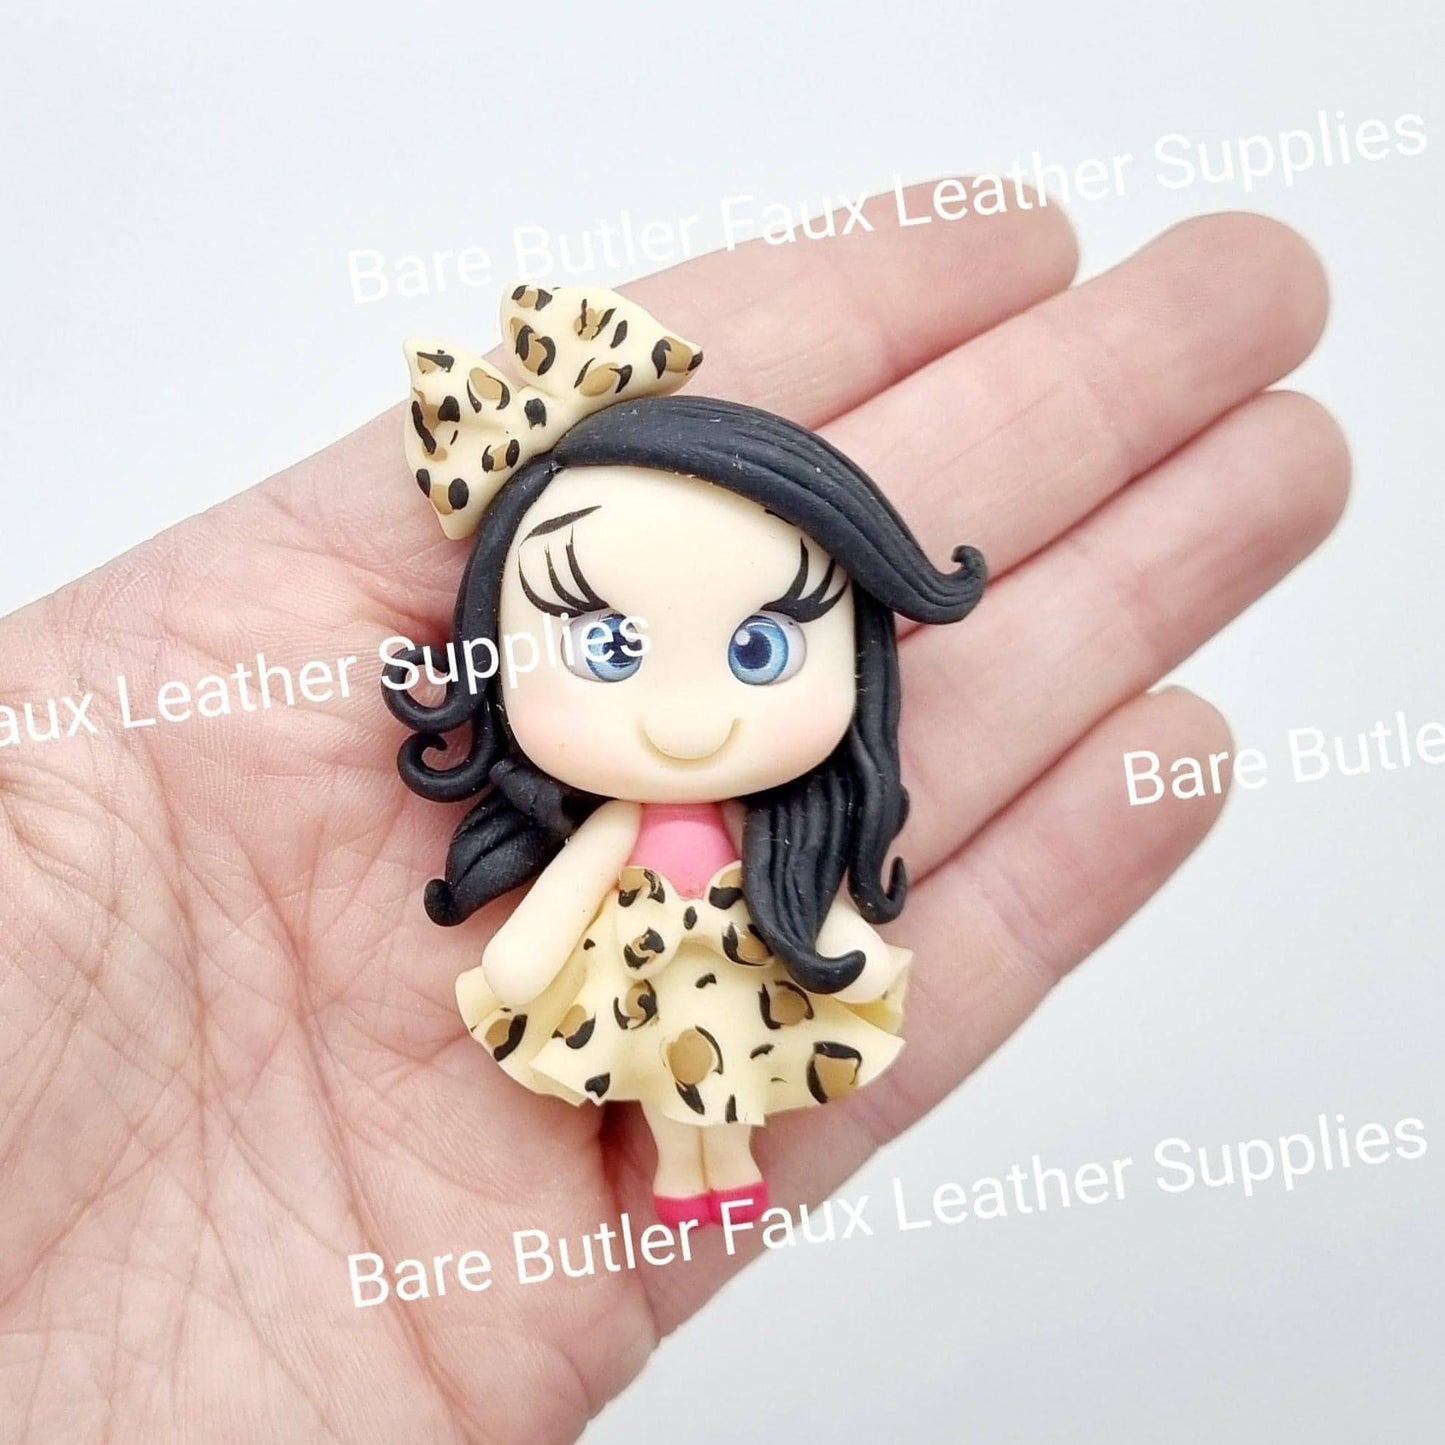 Girls in Leopard dress black hair pink shoes - character, Clay, Clays, leopard - Bare Butler Faux Leather Supplies 